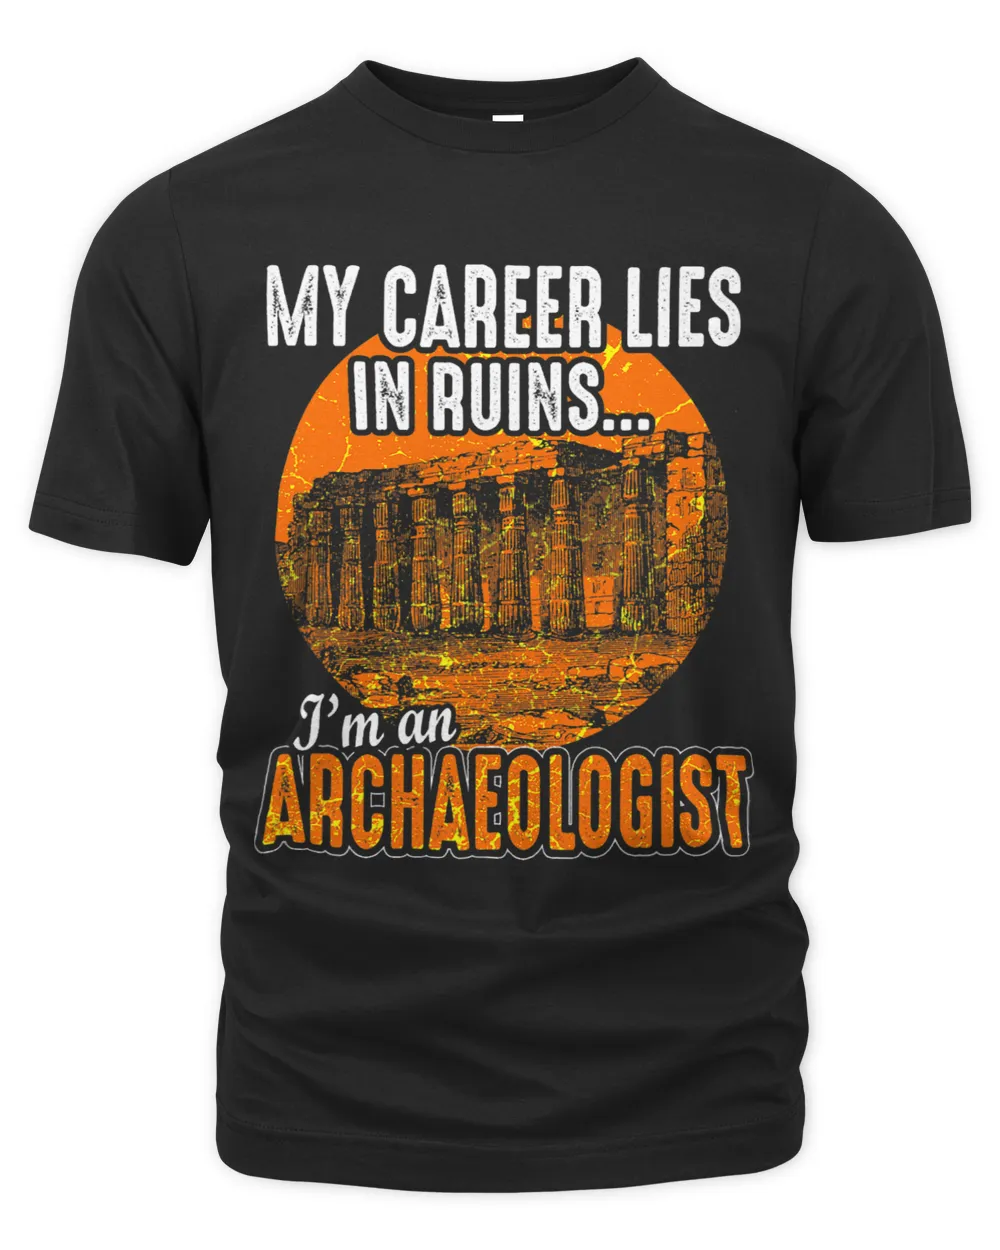 Archaeology Archeology Archaeologist Funny Saying Quote